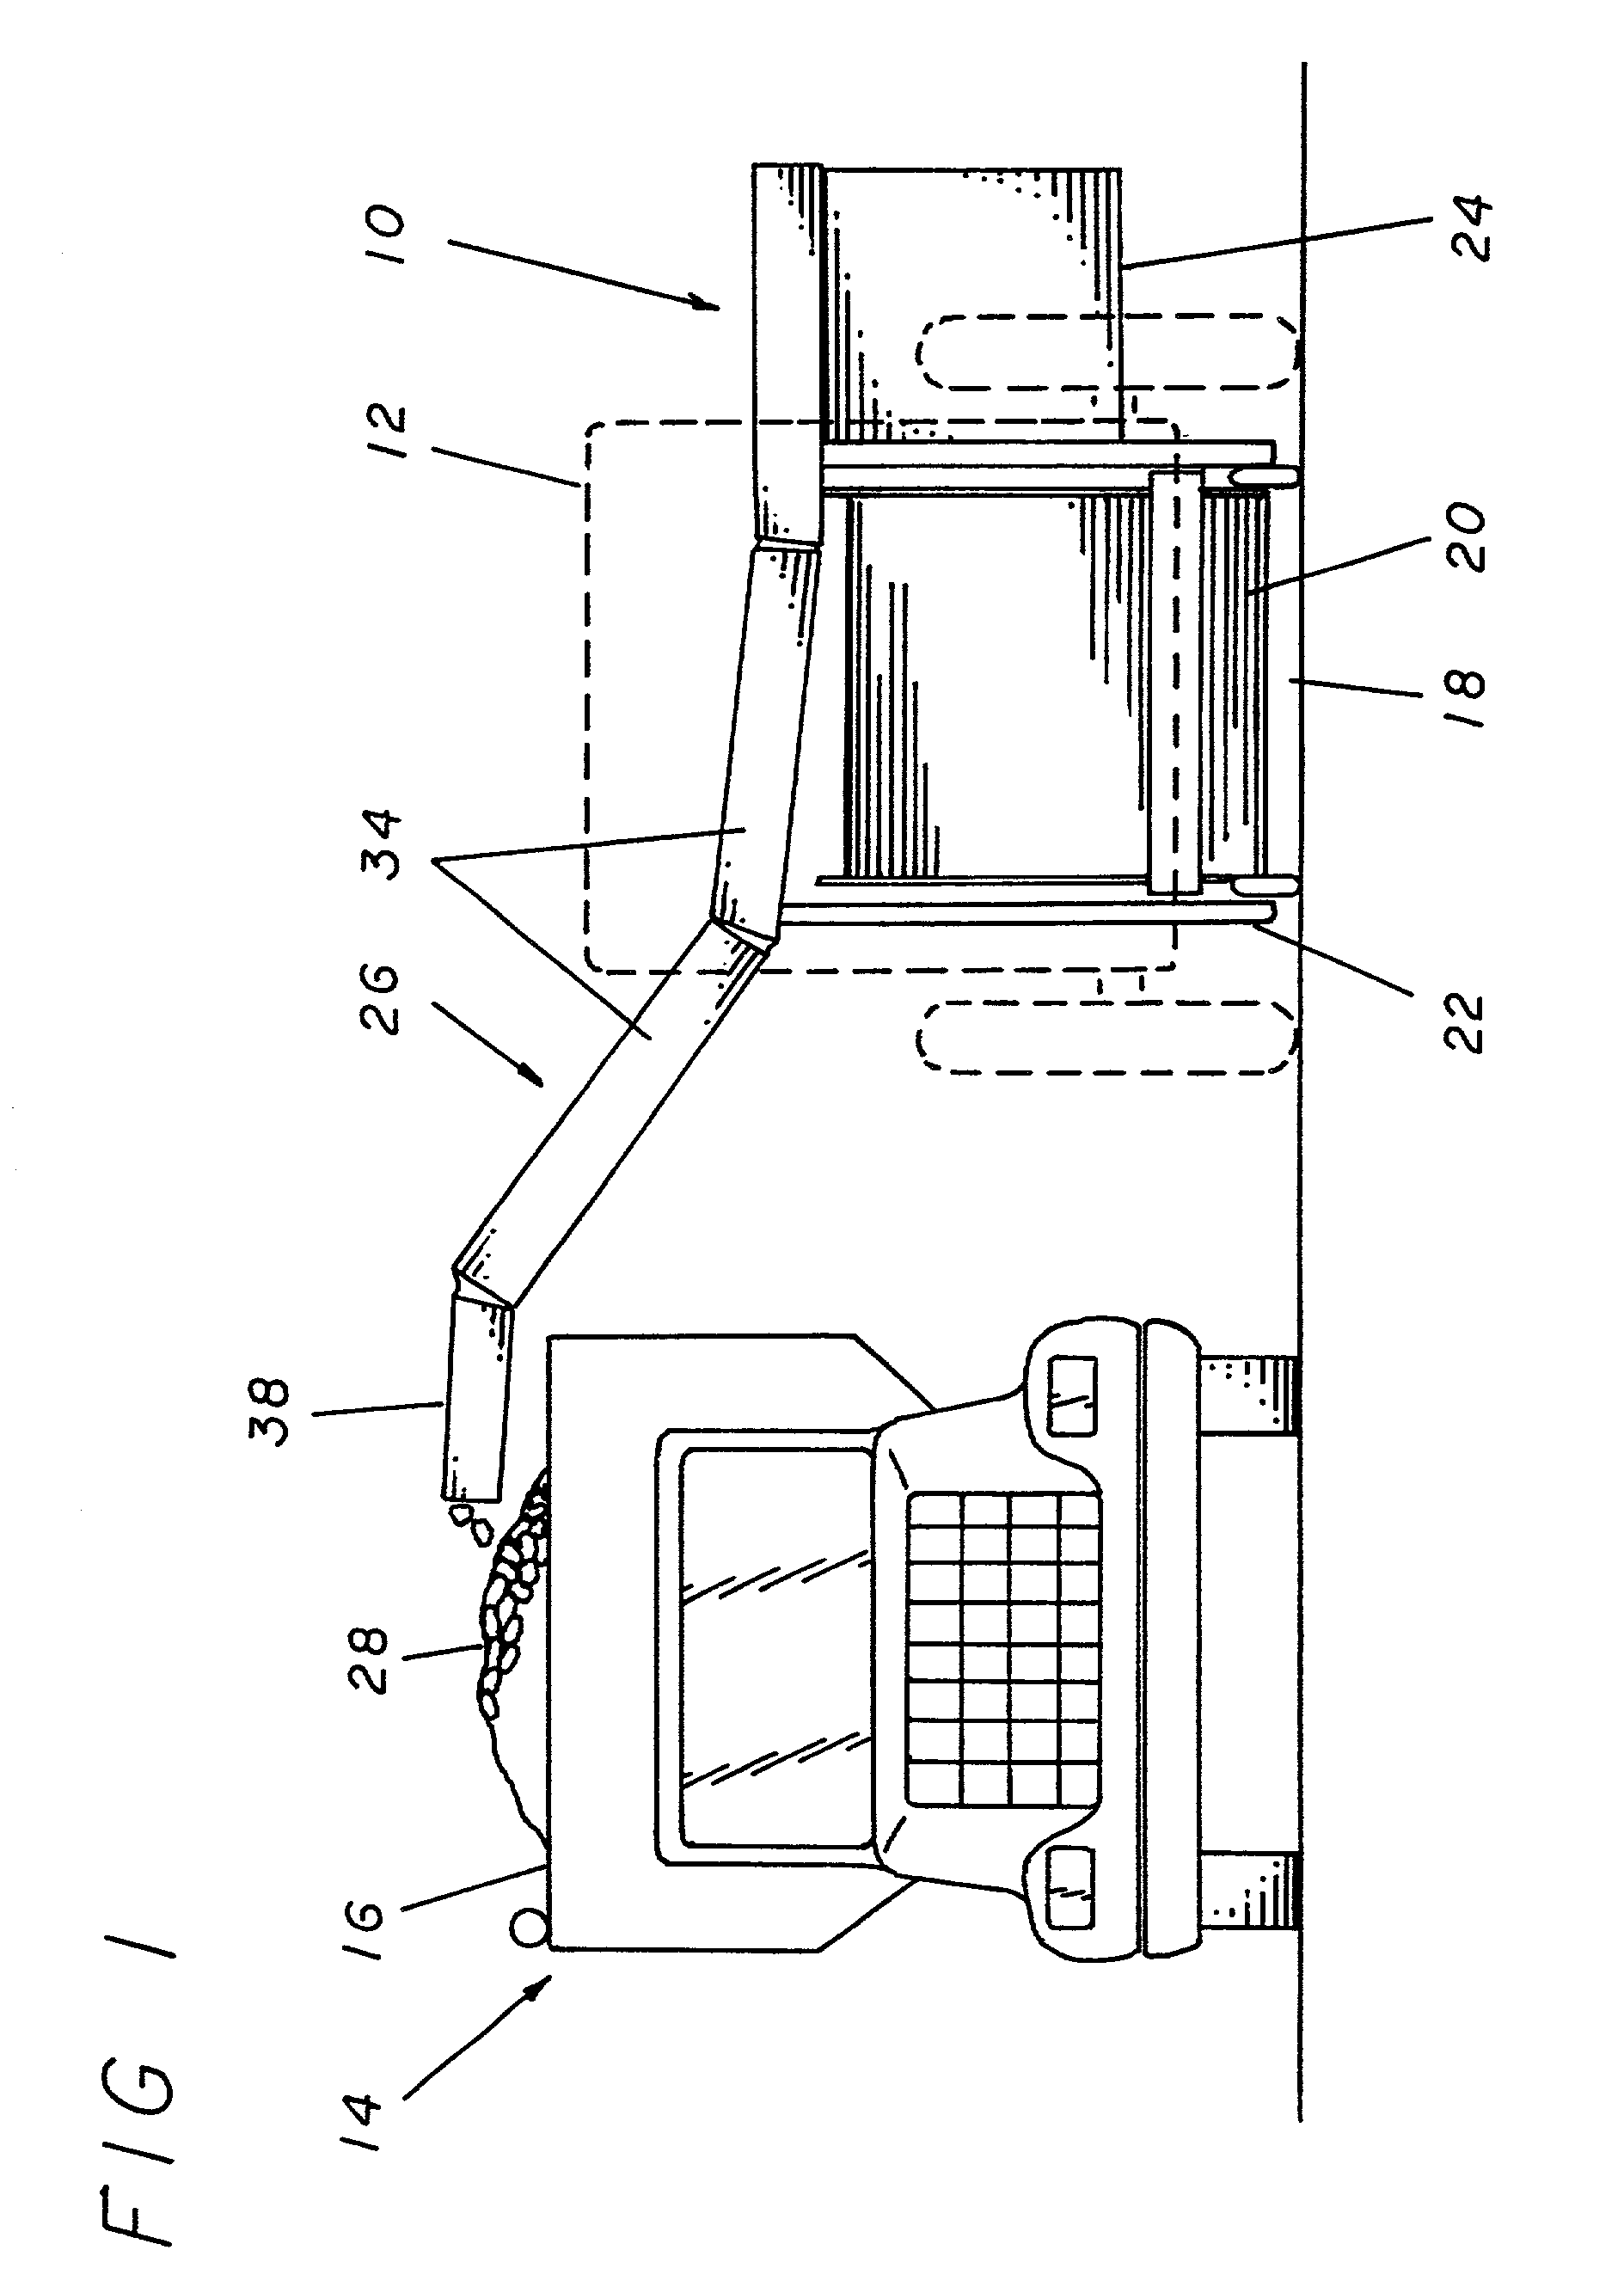 Device used to aid in the loading and unloading of vehicles and implements